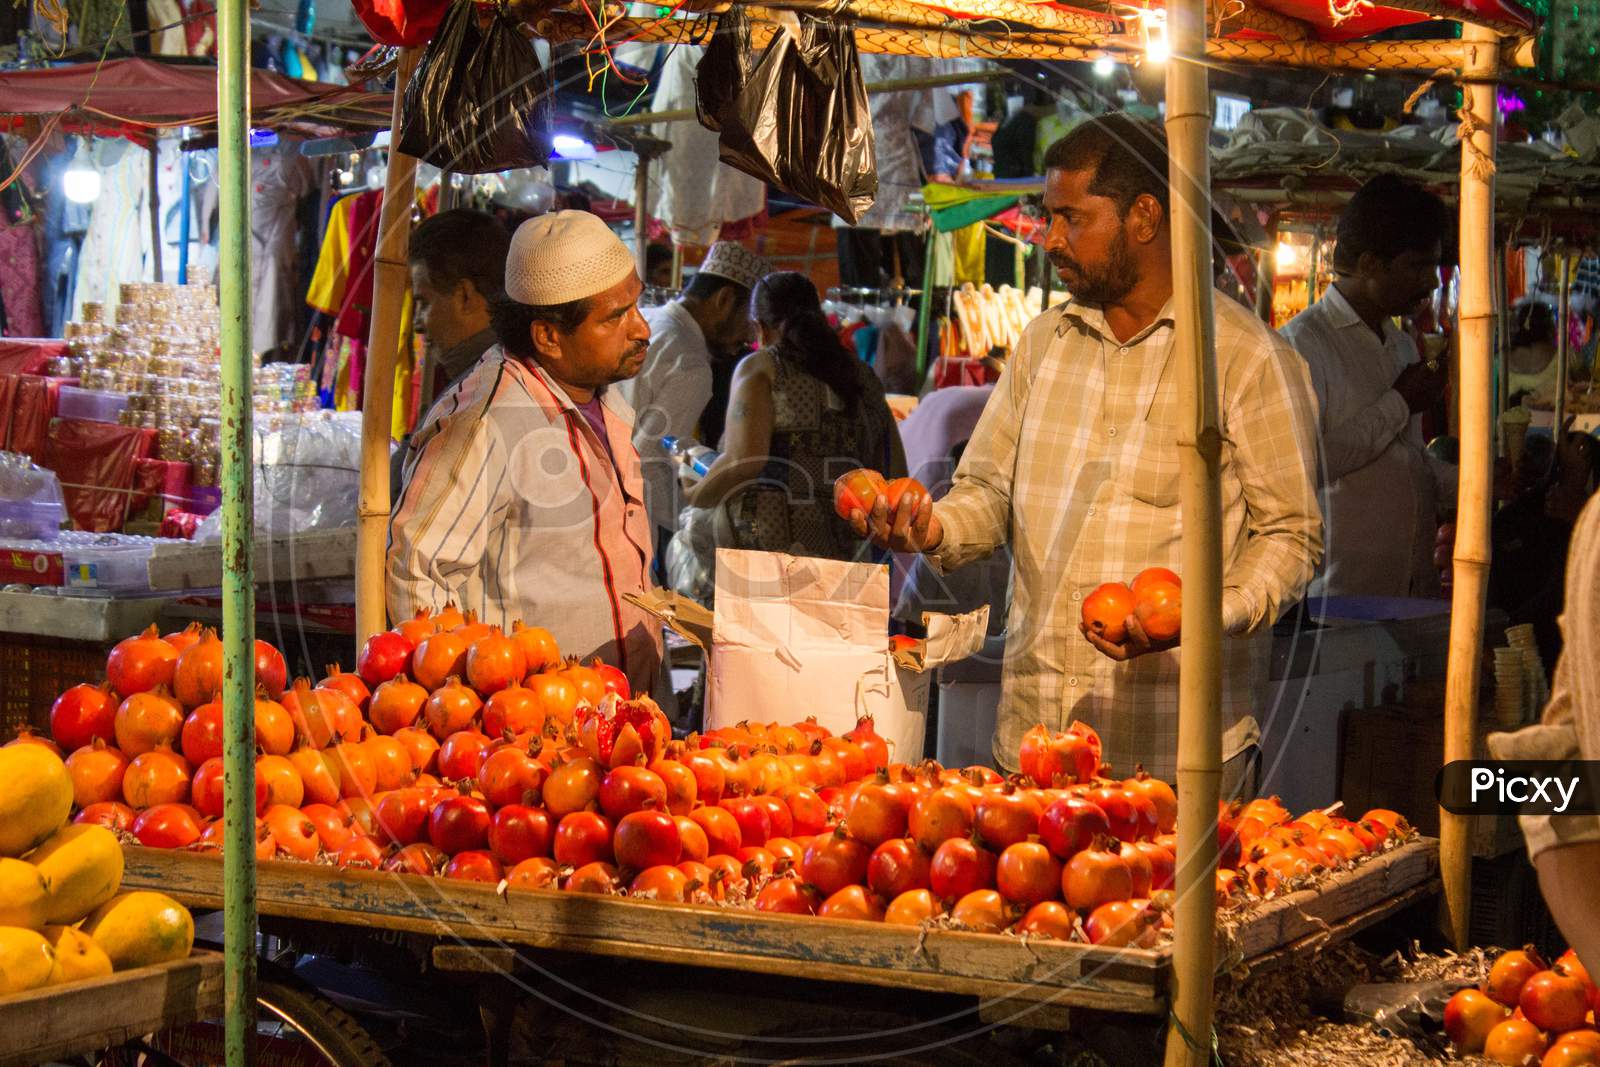 A Fruit Vendor Selling Fruits to People